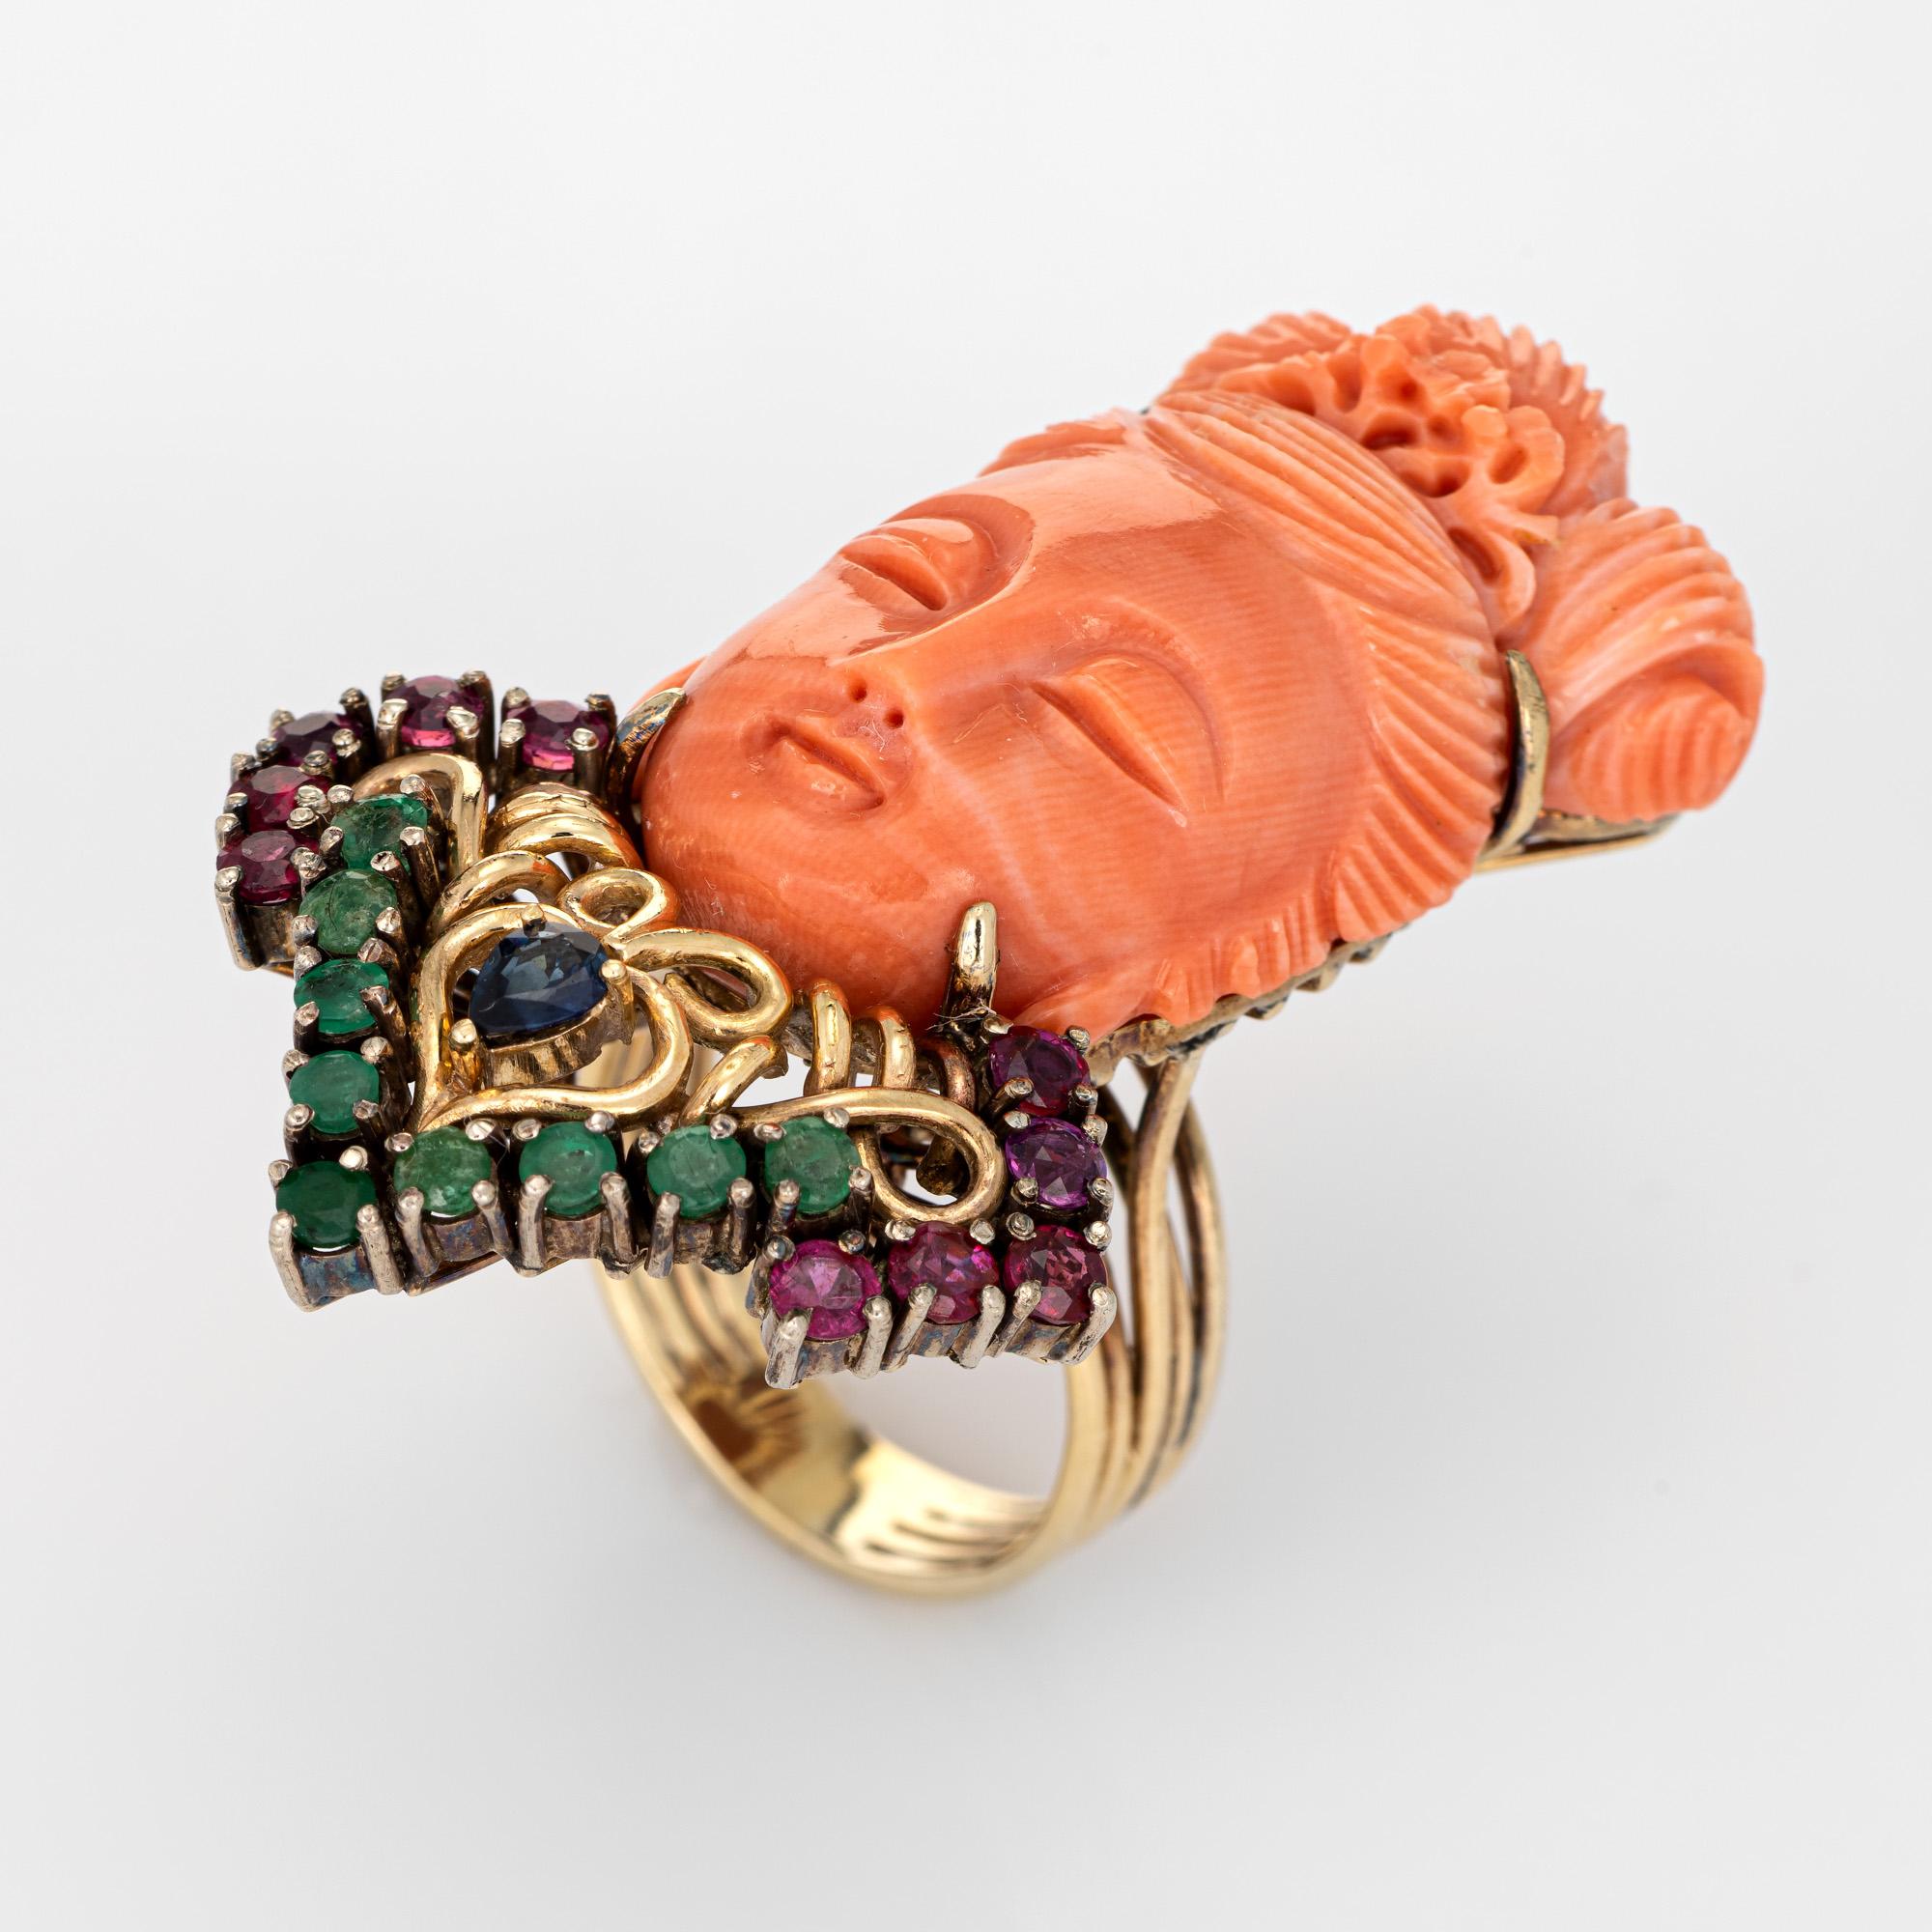 Elaborate and finely detailed cocktail ring depicting Guanyin (circa 1960s) crafted in 14 karat yellow gold. 

Coral is carved in the form of Guanyin measuring 35mm x 20mm. Ten rubies are estimated at 0.05 carats each (0.50 carats total estimated